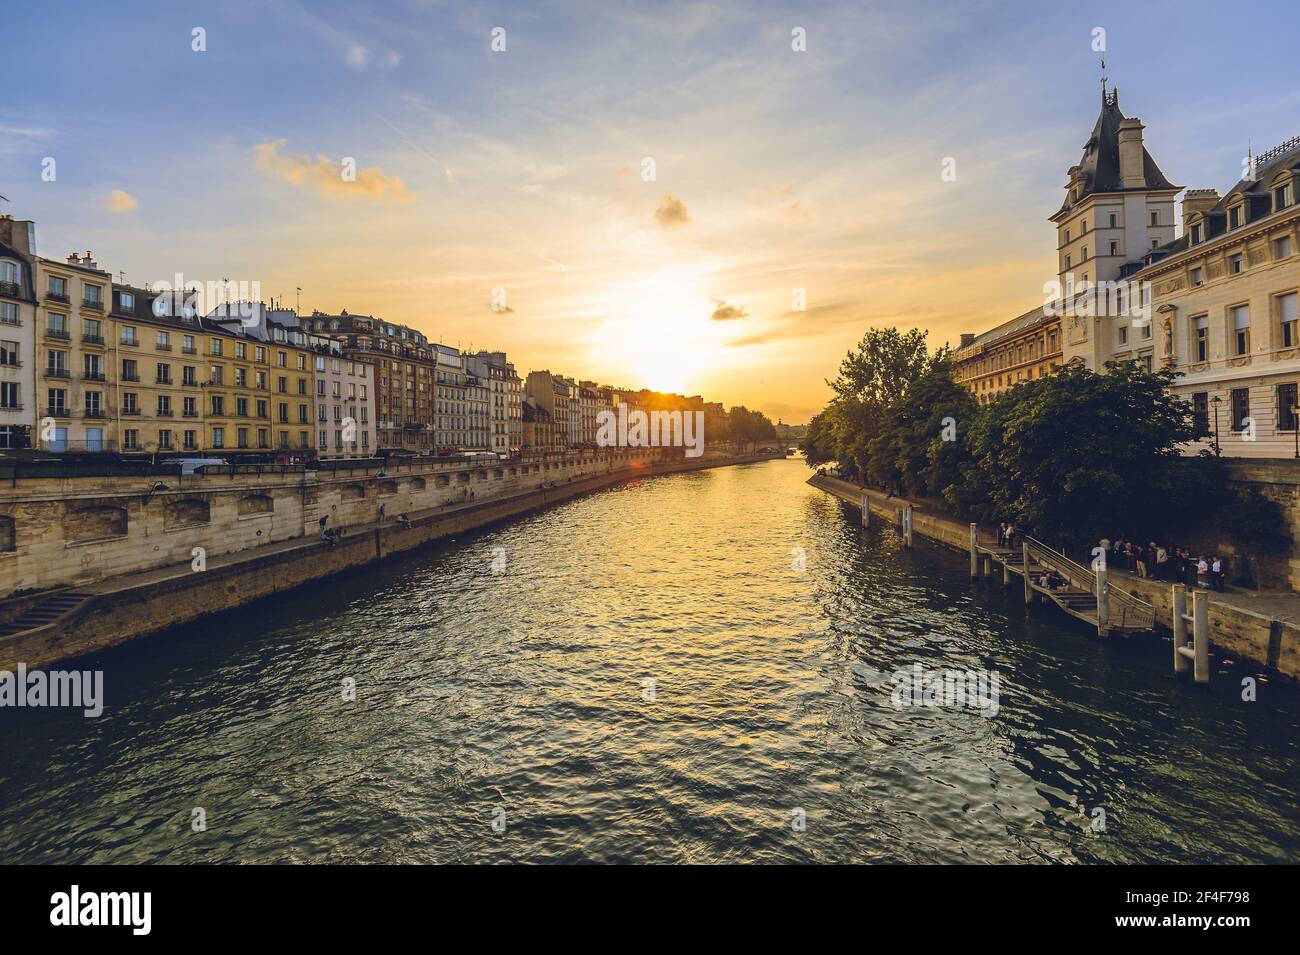 Court of Cassation of france in paris and left bank of seine river at dusk Stock Photo